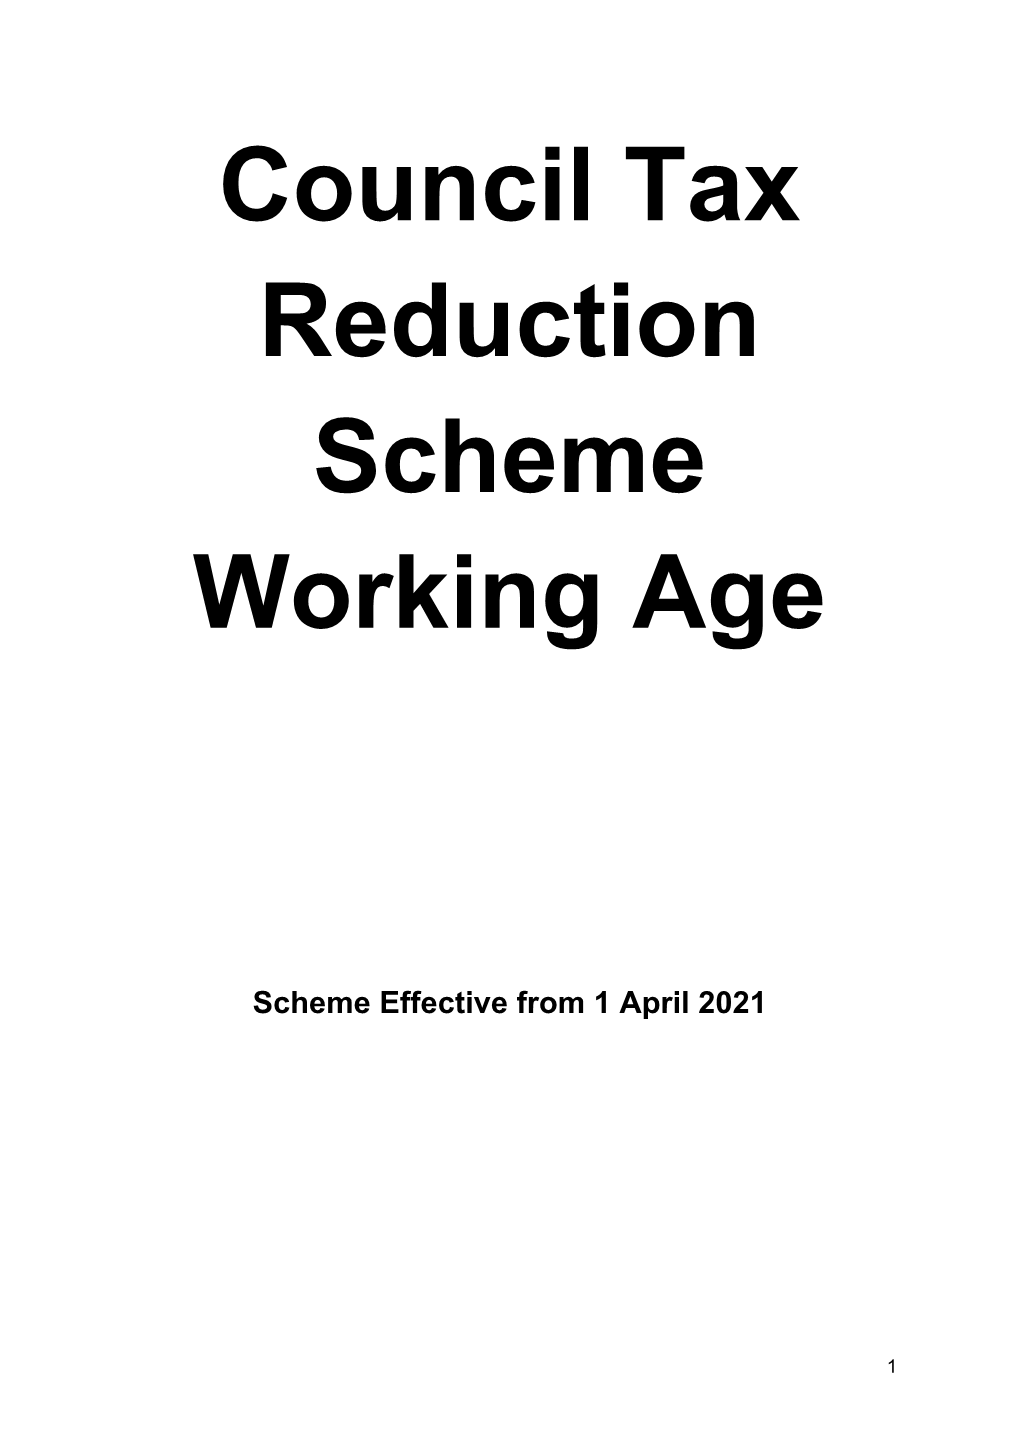 Council Tax Reduction Scheme Working Age